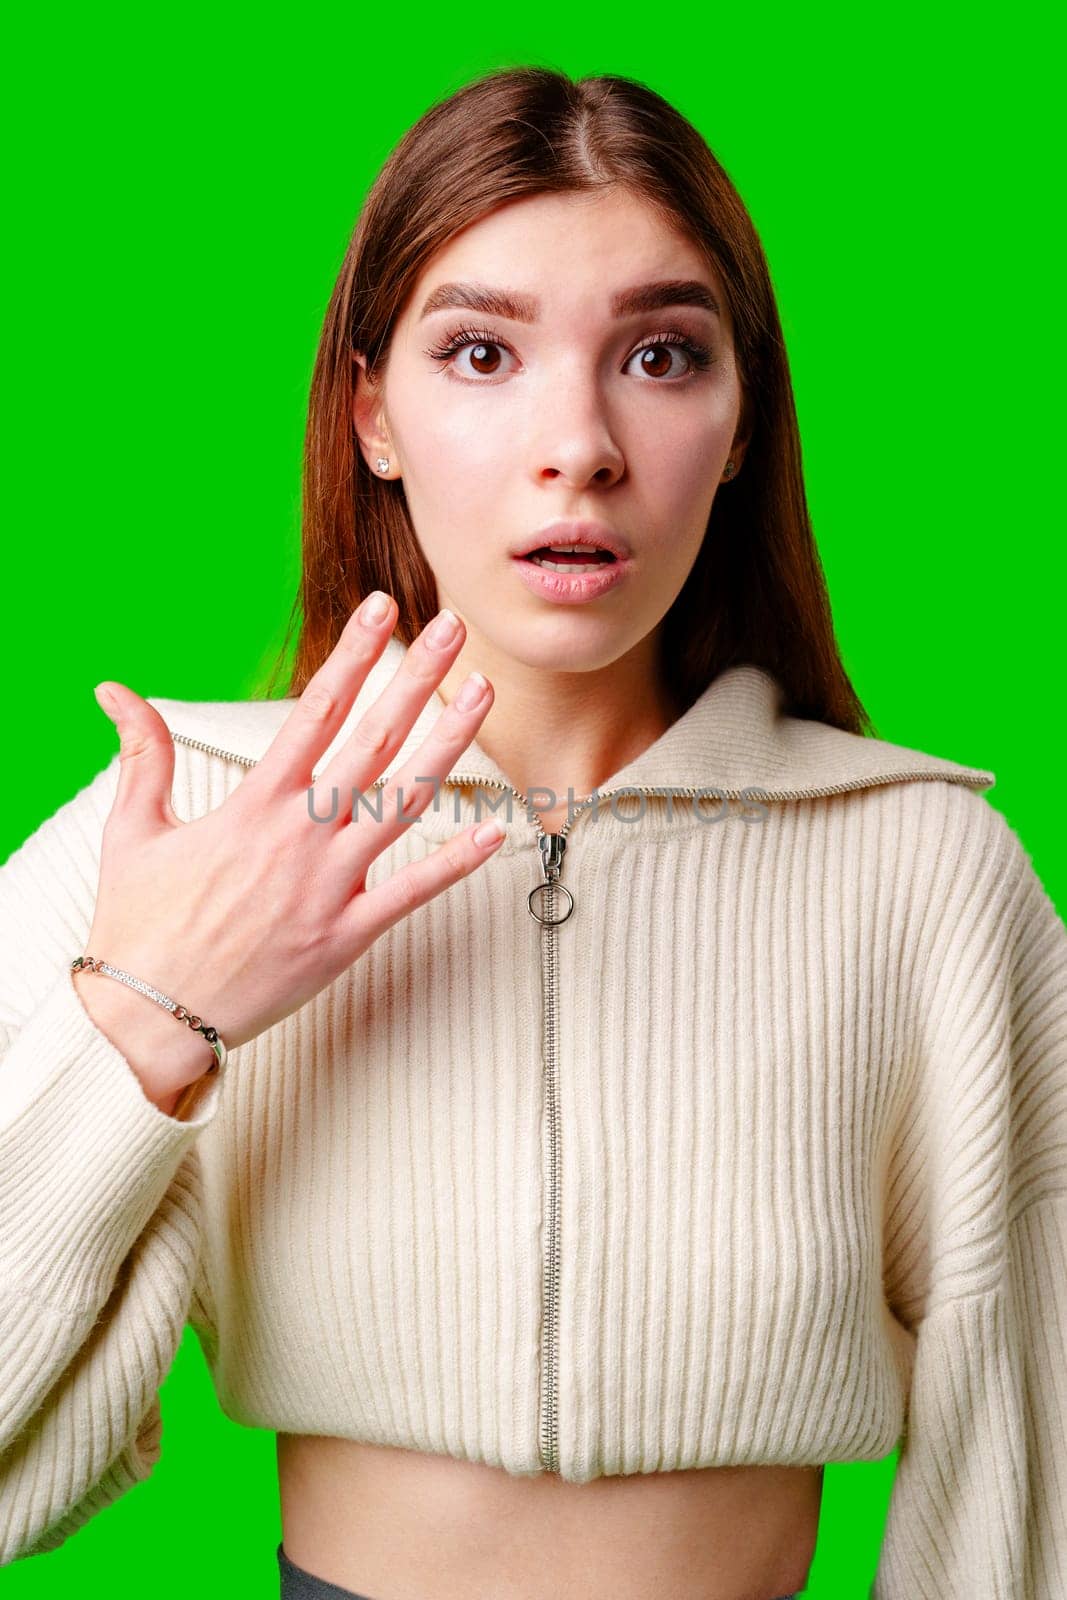 A woman wearing a white sweater is gesturing with her hand, possibly expressing emotion or emphasizing a point. Her hand movement is clear and deliberate. She appears focused and engaged in her communication.